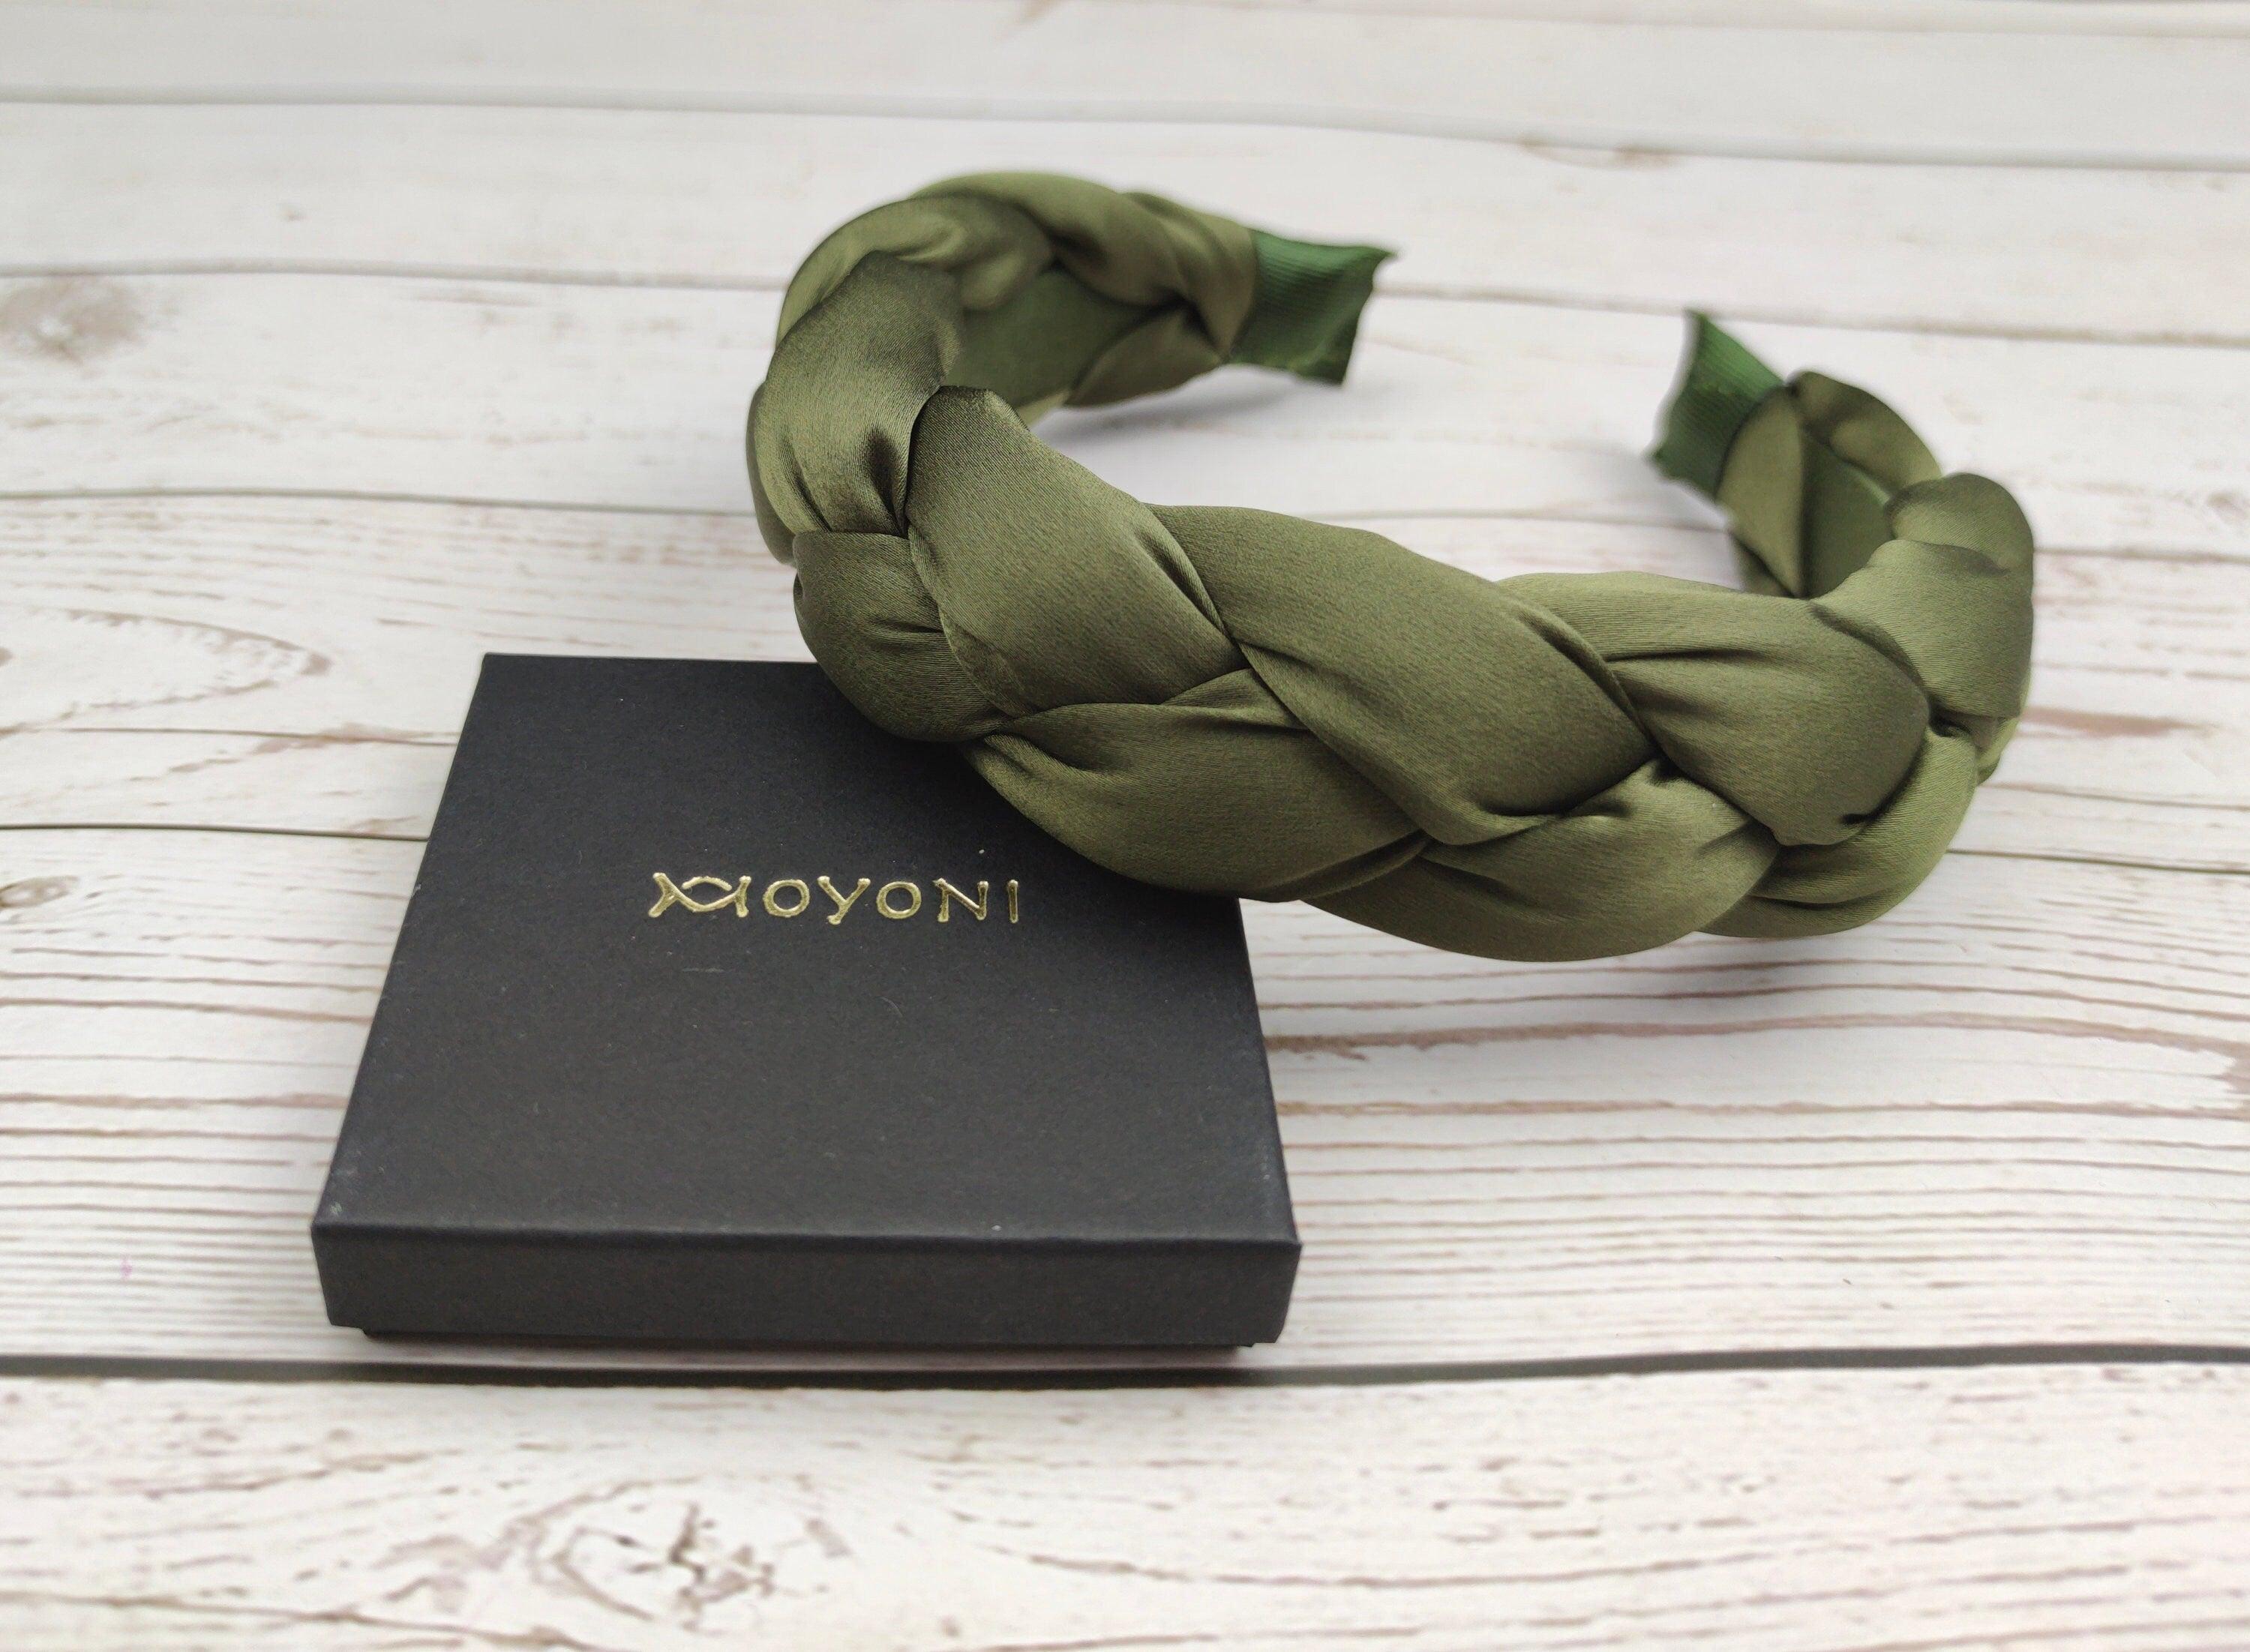 Luxurious Stylish Army Green Padded Satin Headband - Twisted Women's Fashion Accessory - Braided Girl's Hairband - Pea Green Knotted Turban available at Moyoni Design